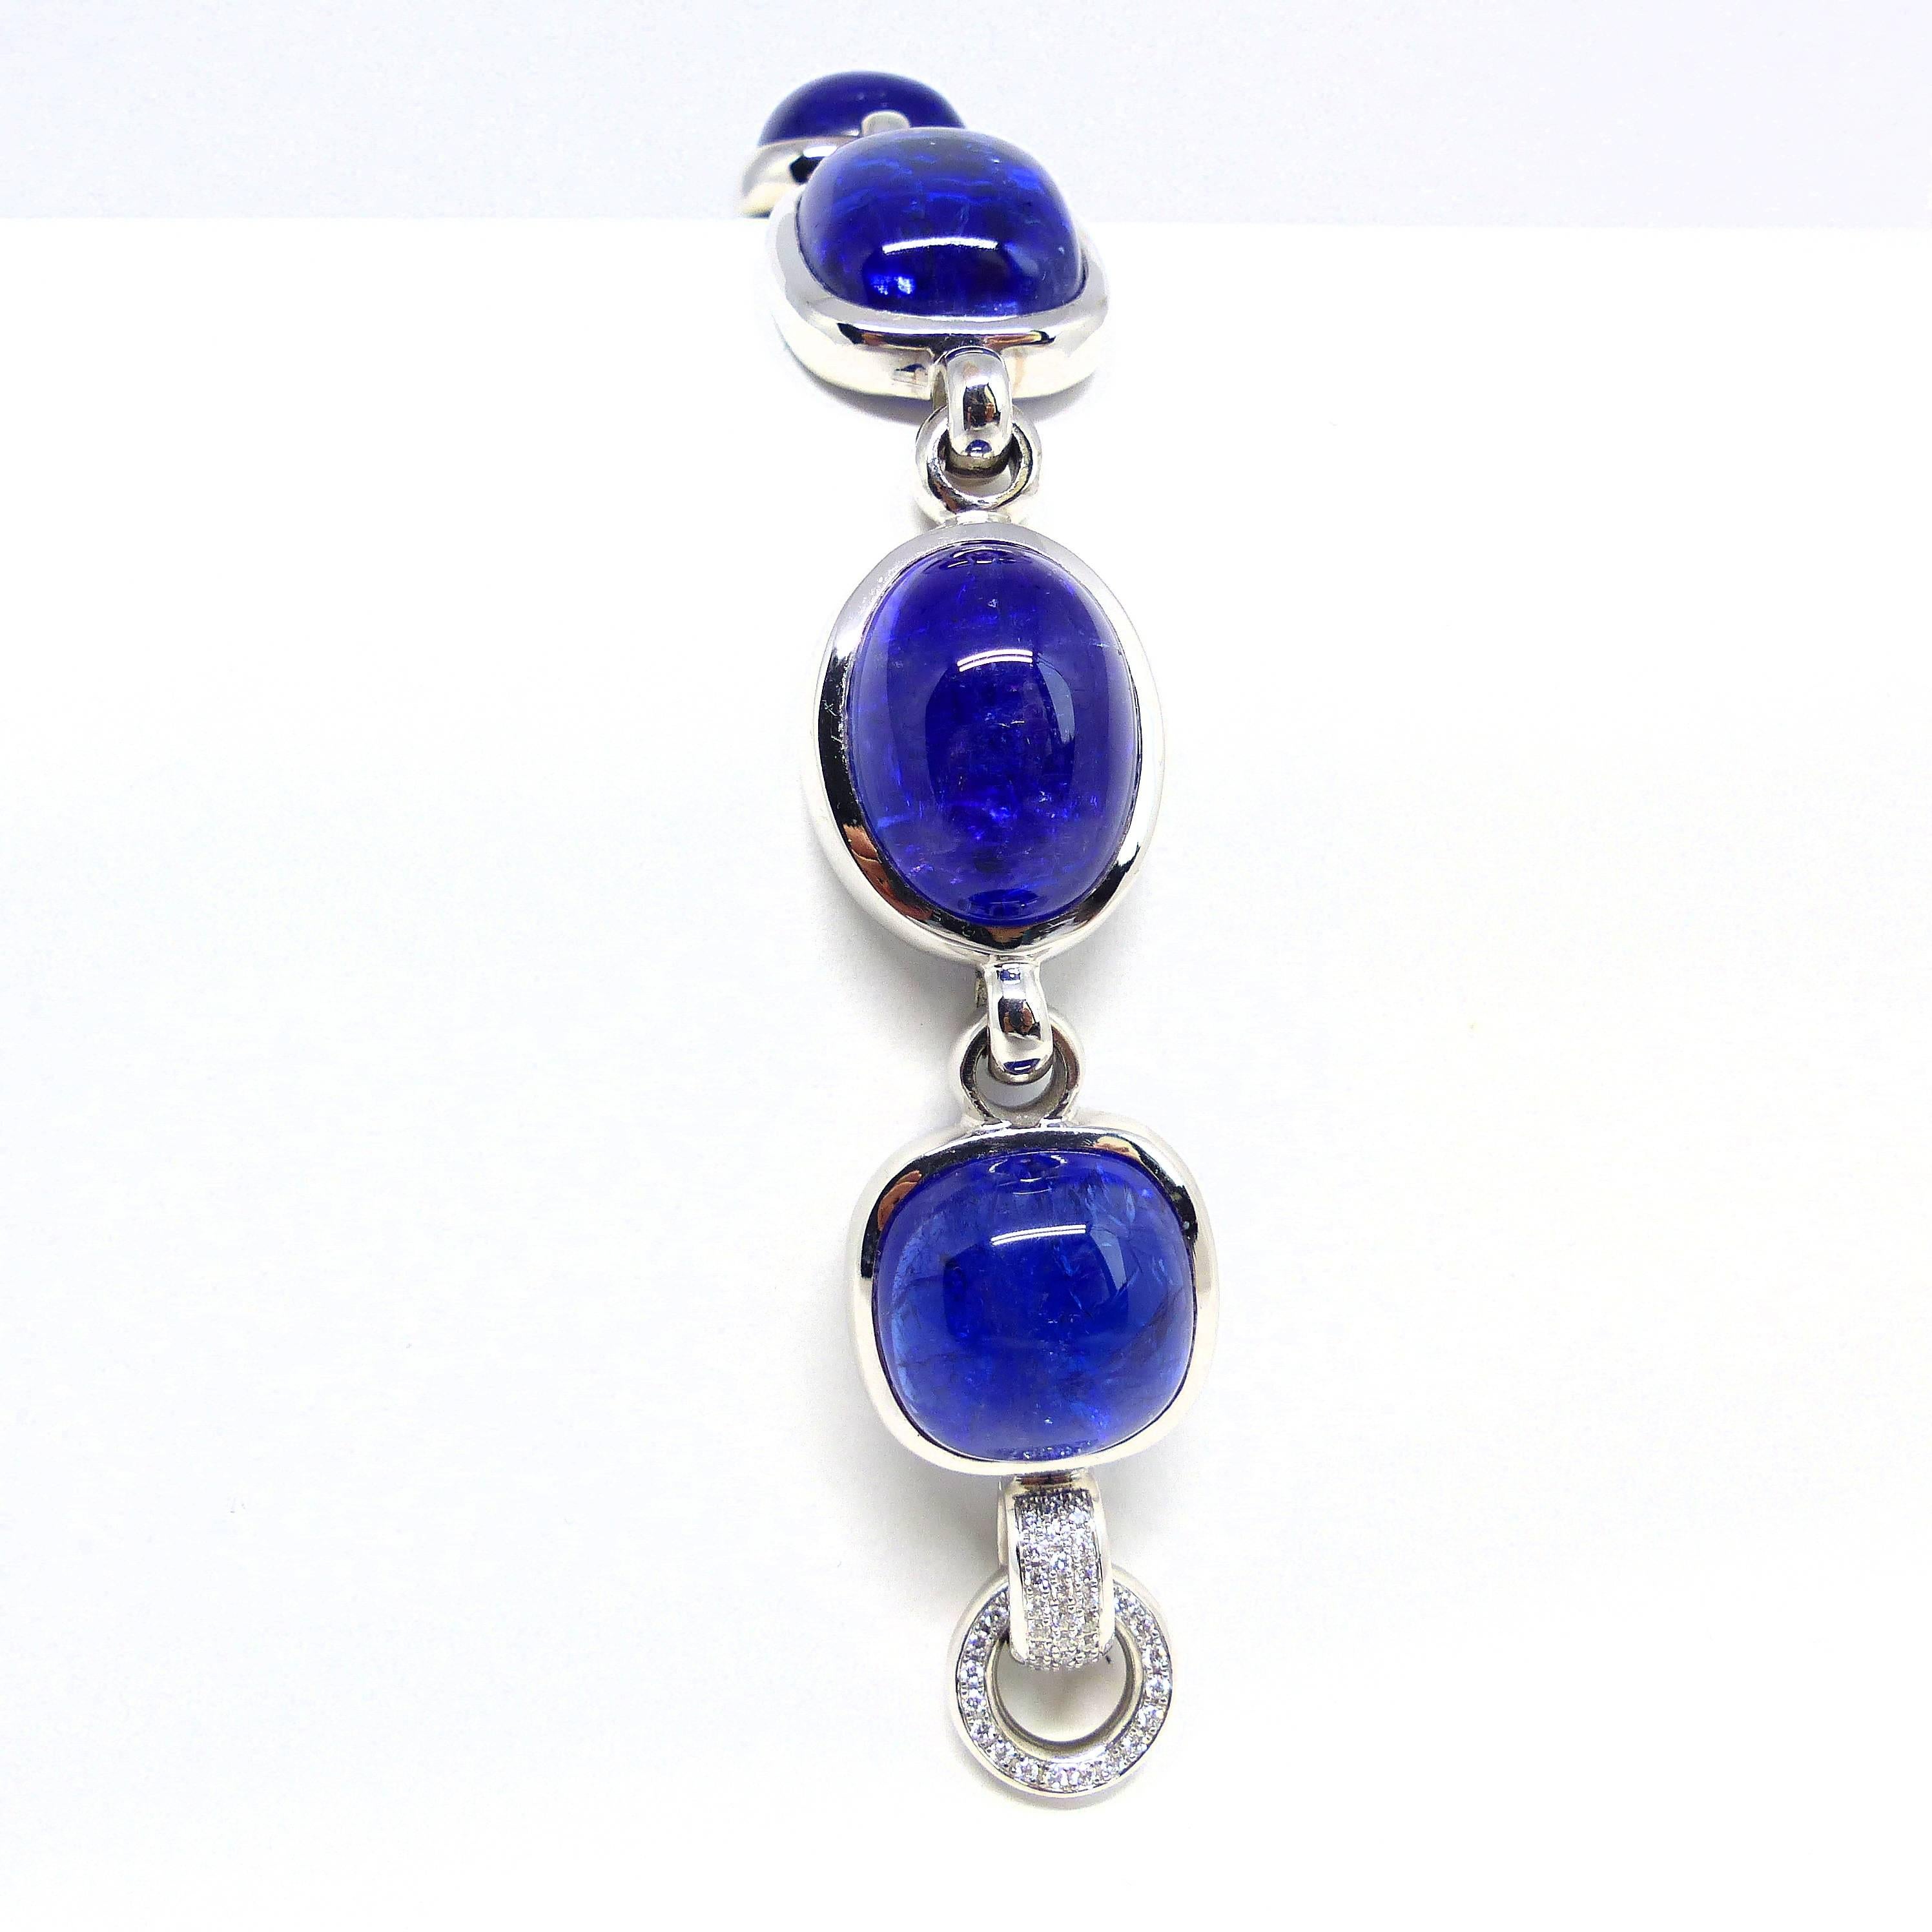 Cabochon Bracelet in White Gold with 6 Tanzanite Cabouchons and Diamonds. For Sale